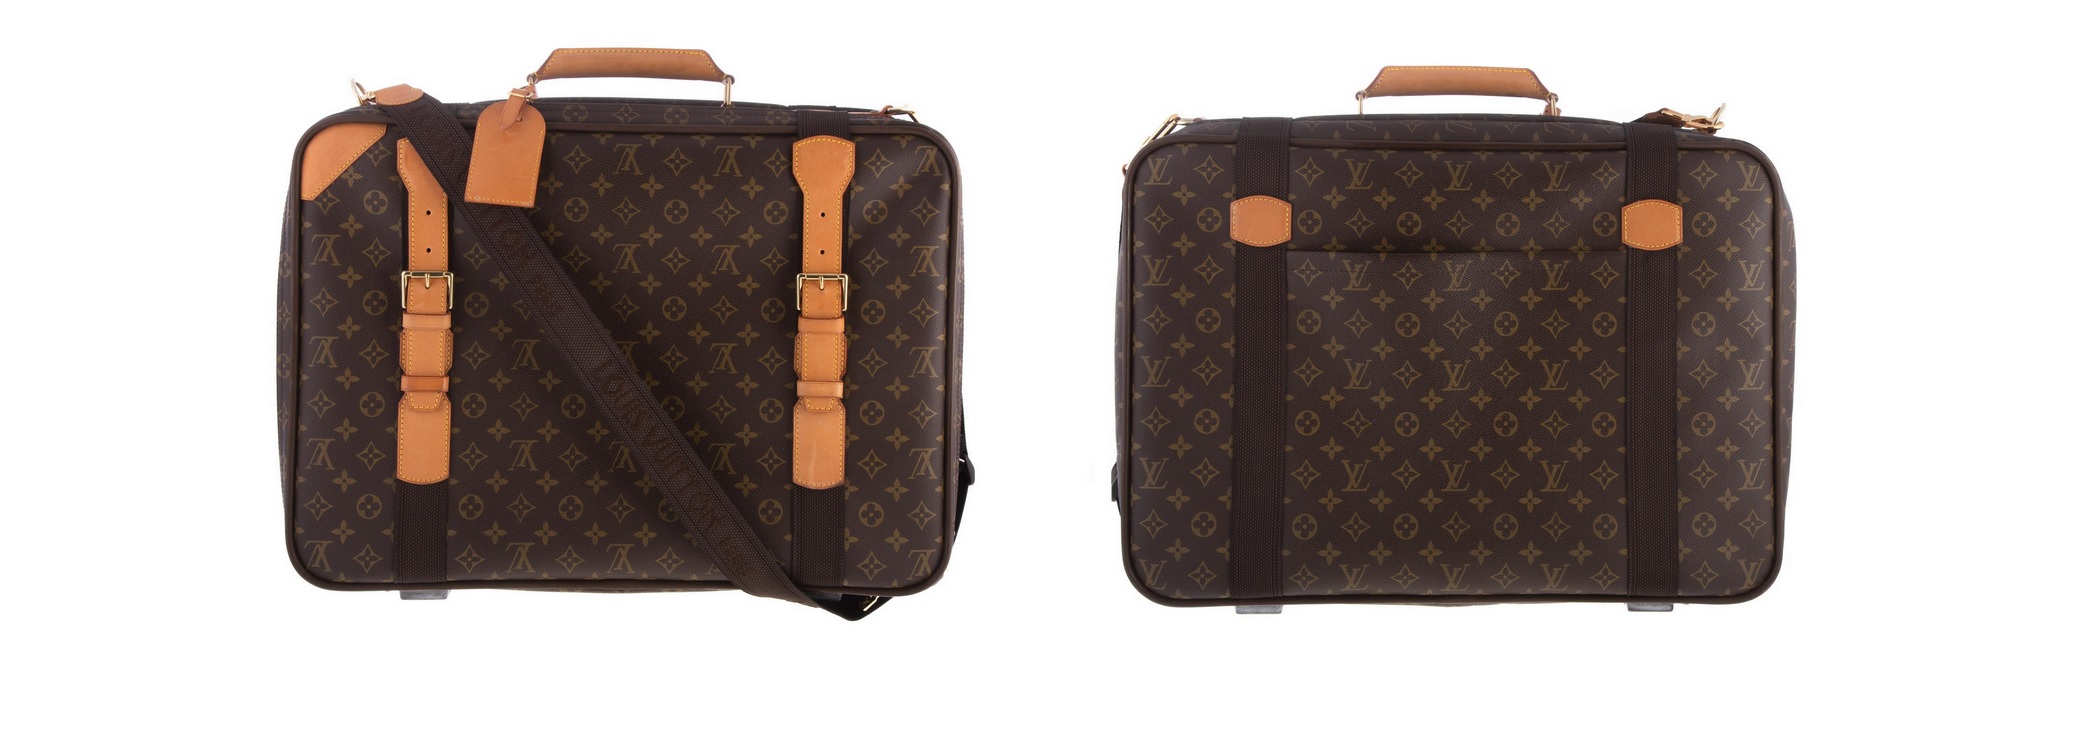 Sold at Auction: Louis Vuitton suitcase Satellite 70 in